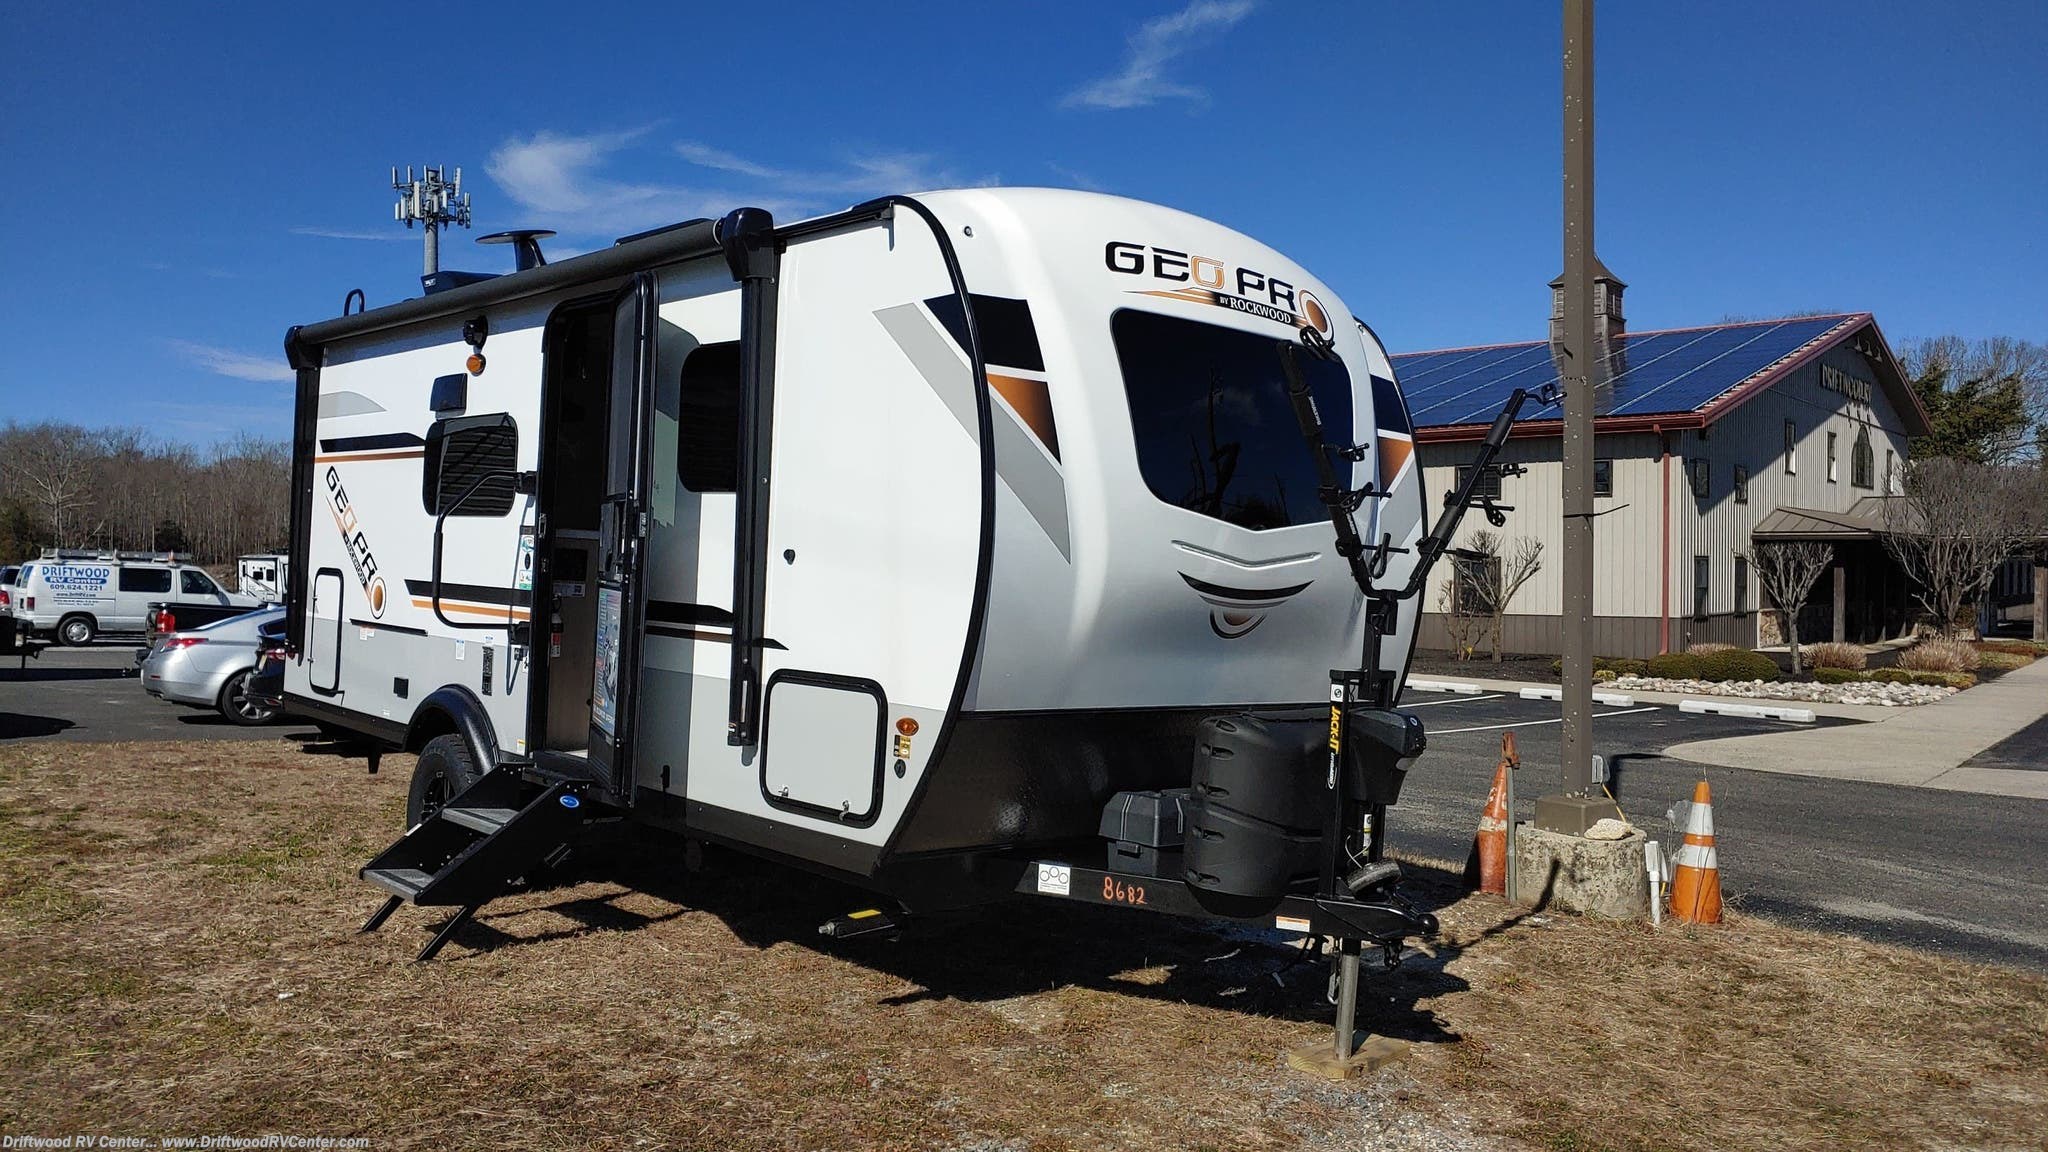 2021 Forest River Rockwood Geo Pro 20FBS RV for Sale in Clermont, NJ